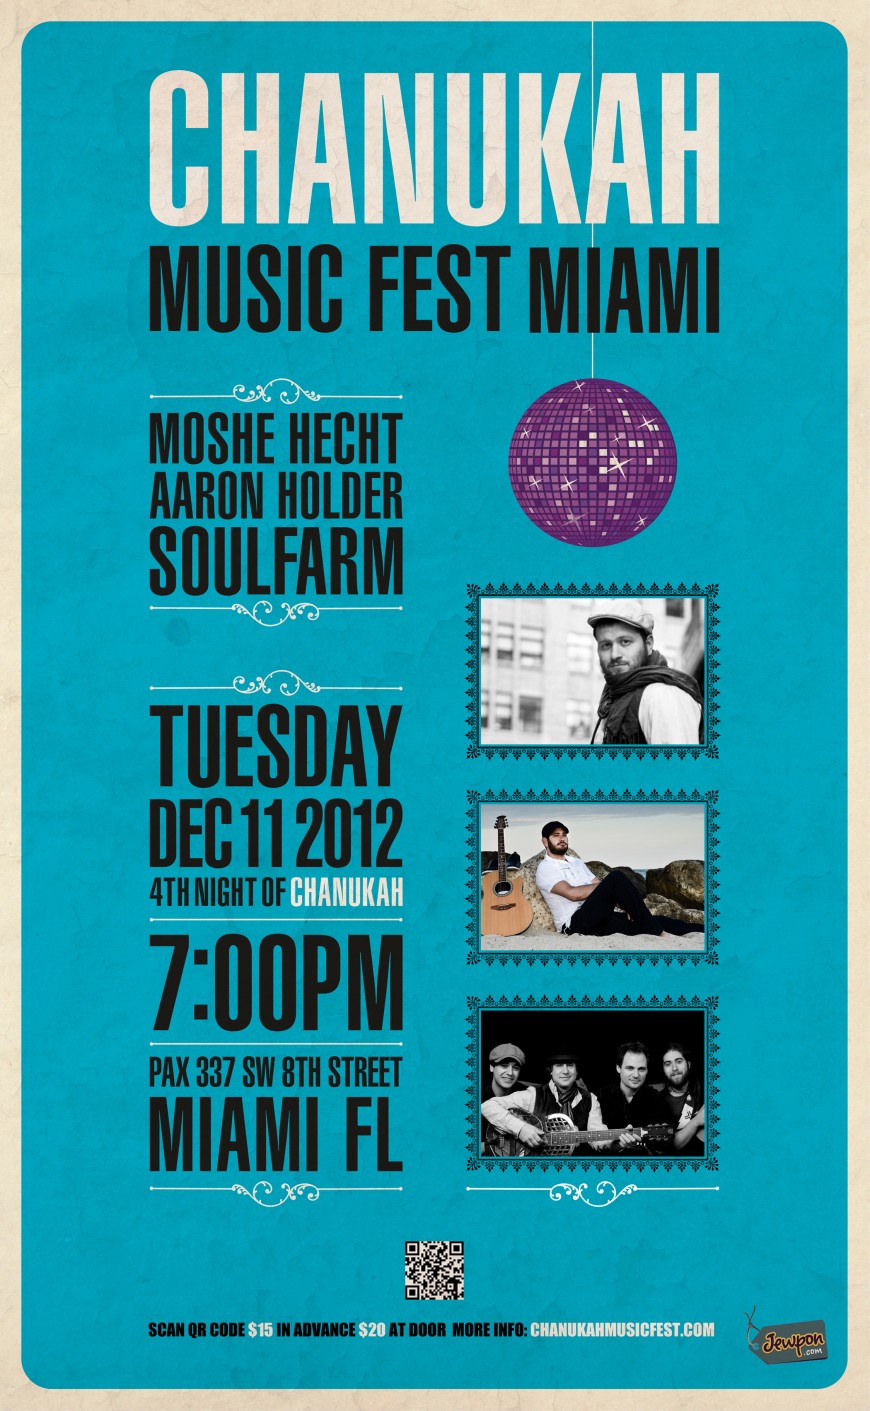 Chanukah Music Festival in Miami With Aaron Holder, Moshe Hecht & Soulfarm